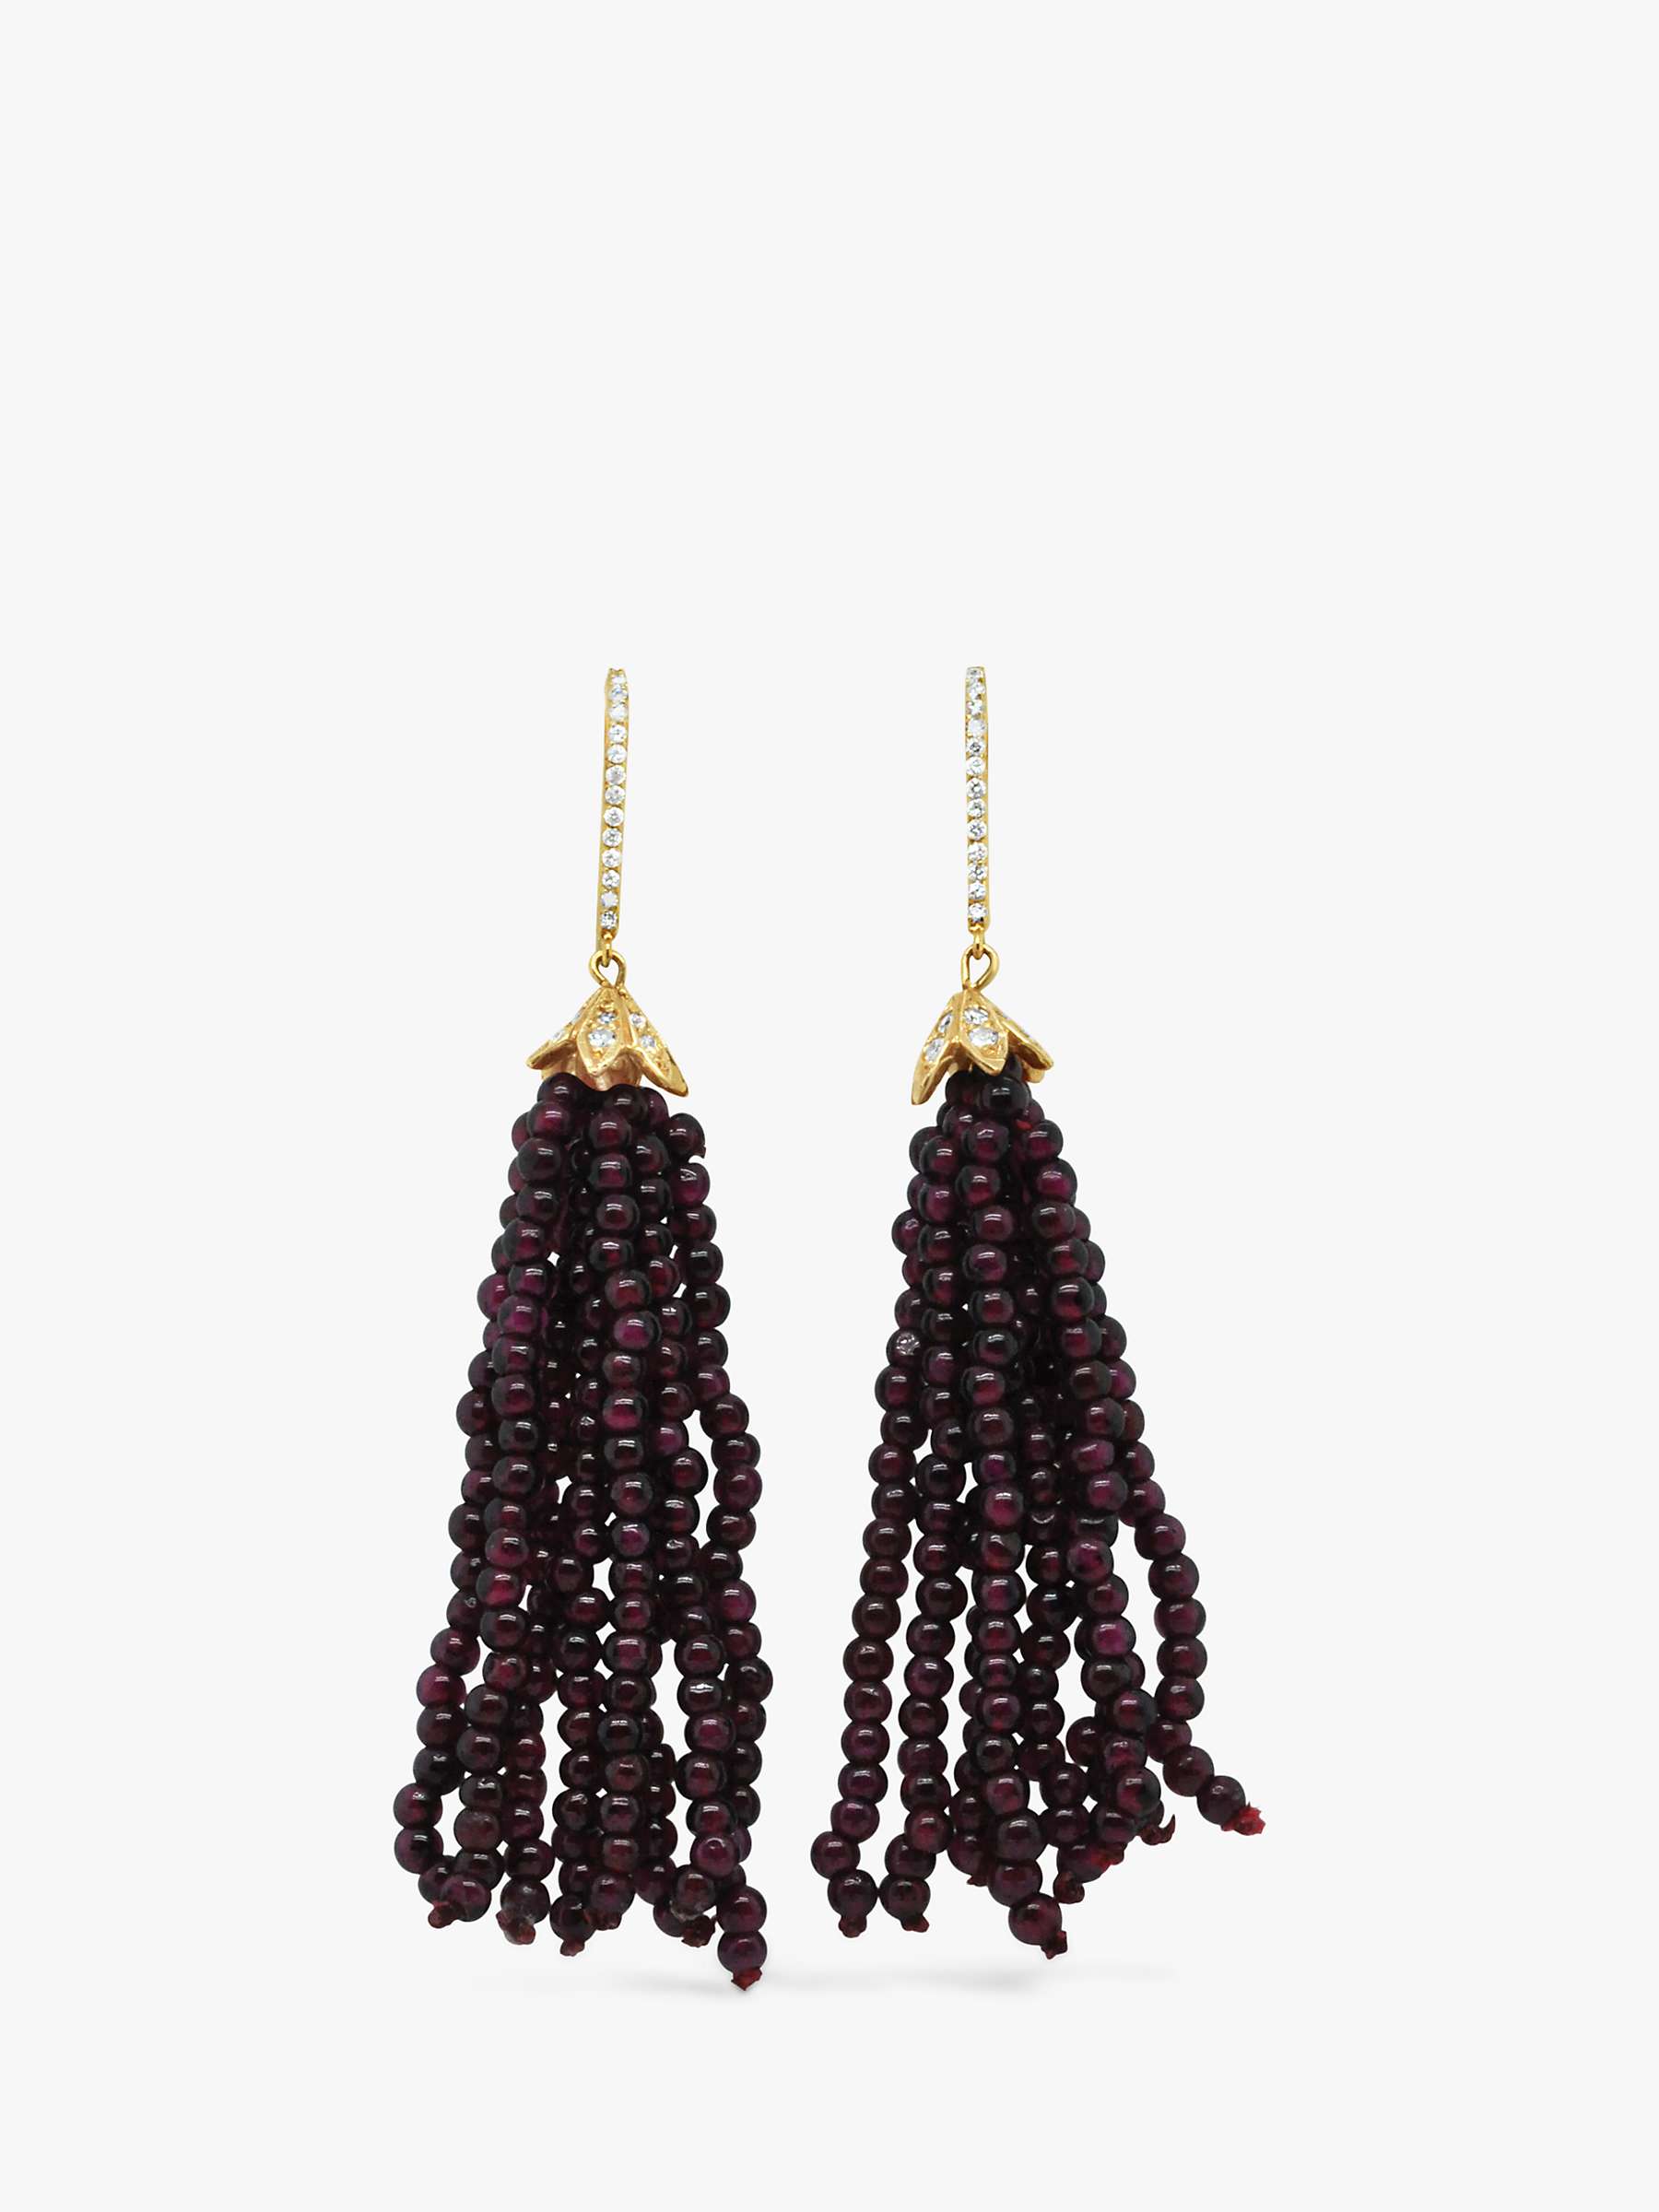 Buy Milton & Humble Jewellery Second Hand 14ct Gold Diamond and Garnet Drop Earrings Online at johnlewis.com